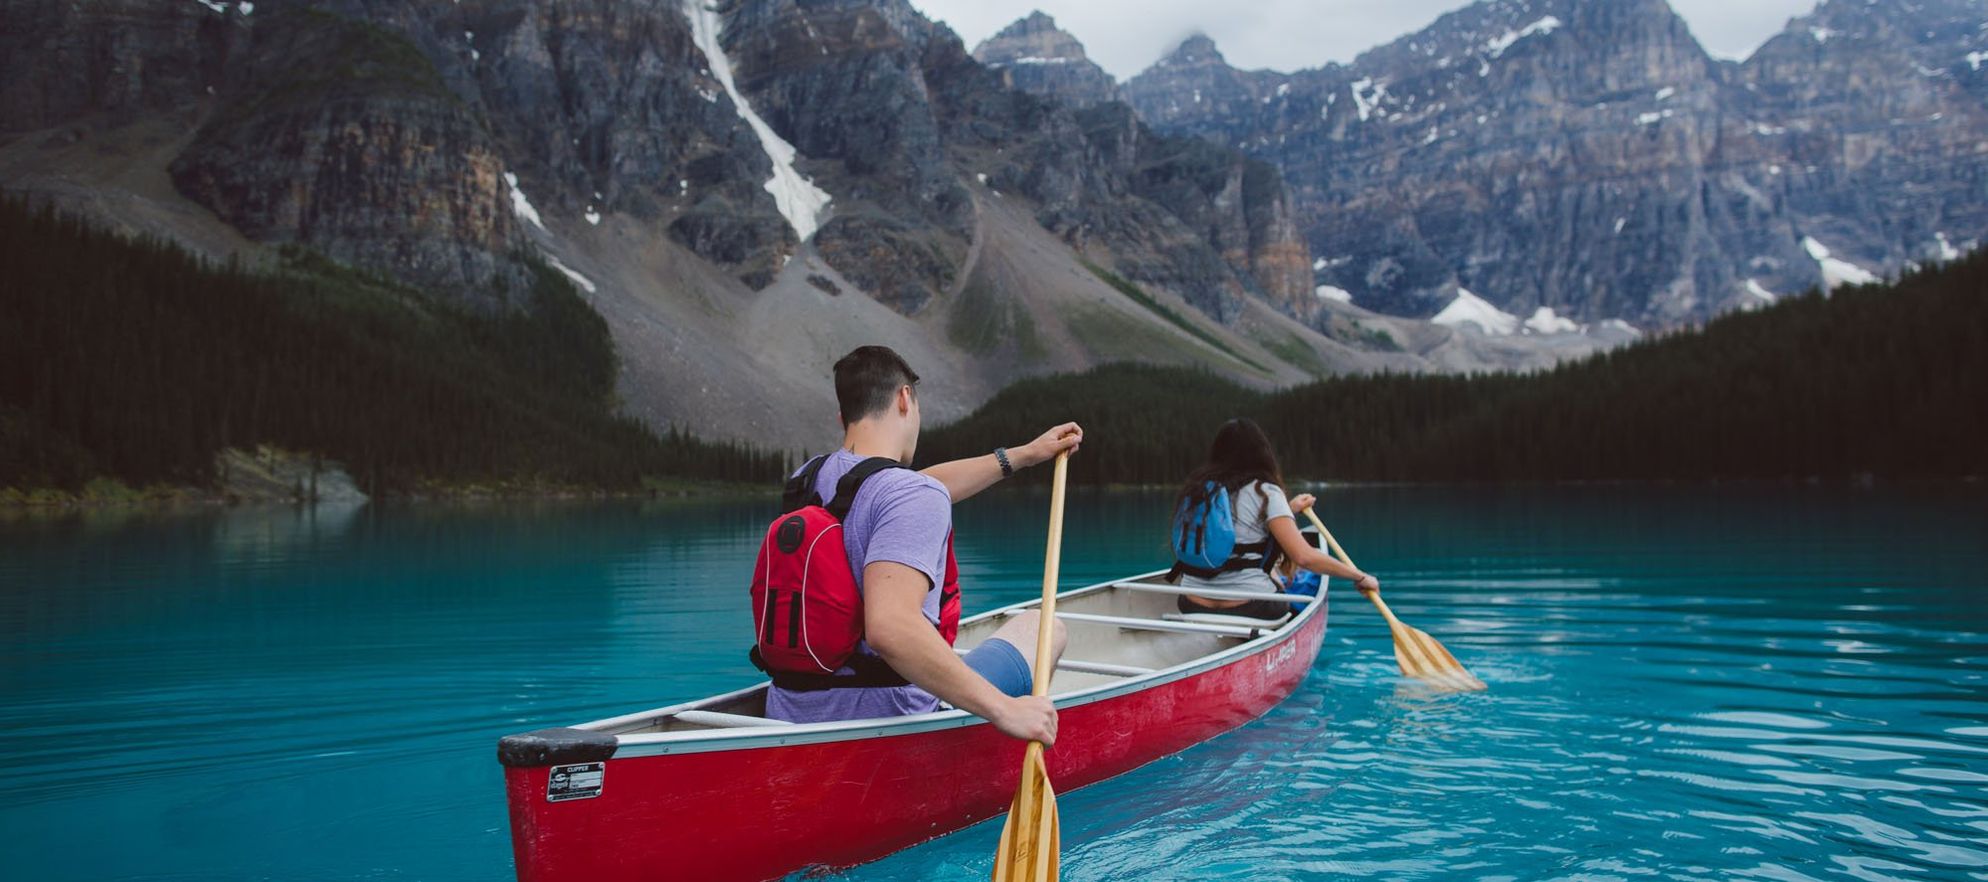 7 Things to Do in Summer in Banff and Lake Louise